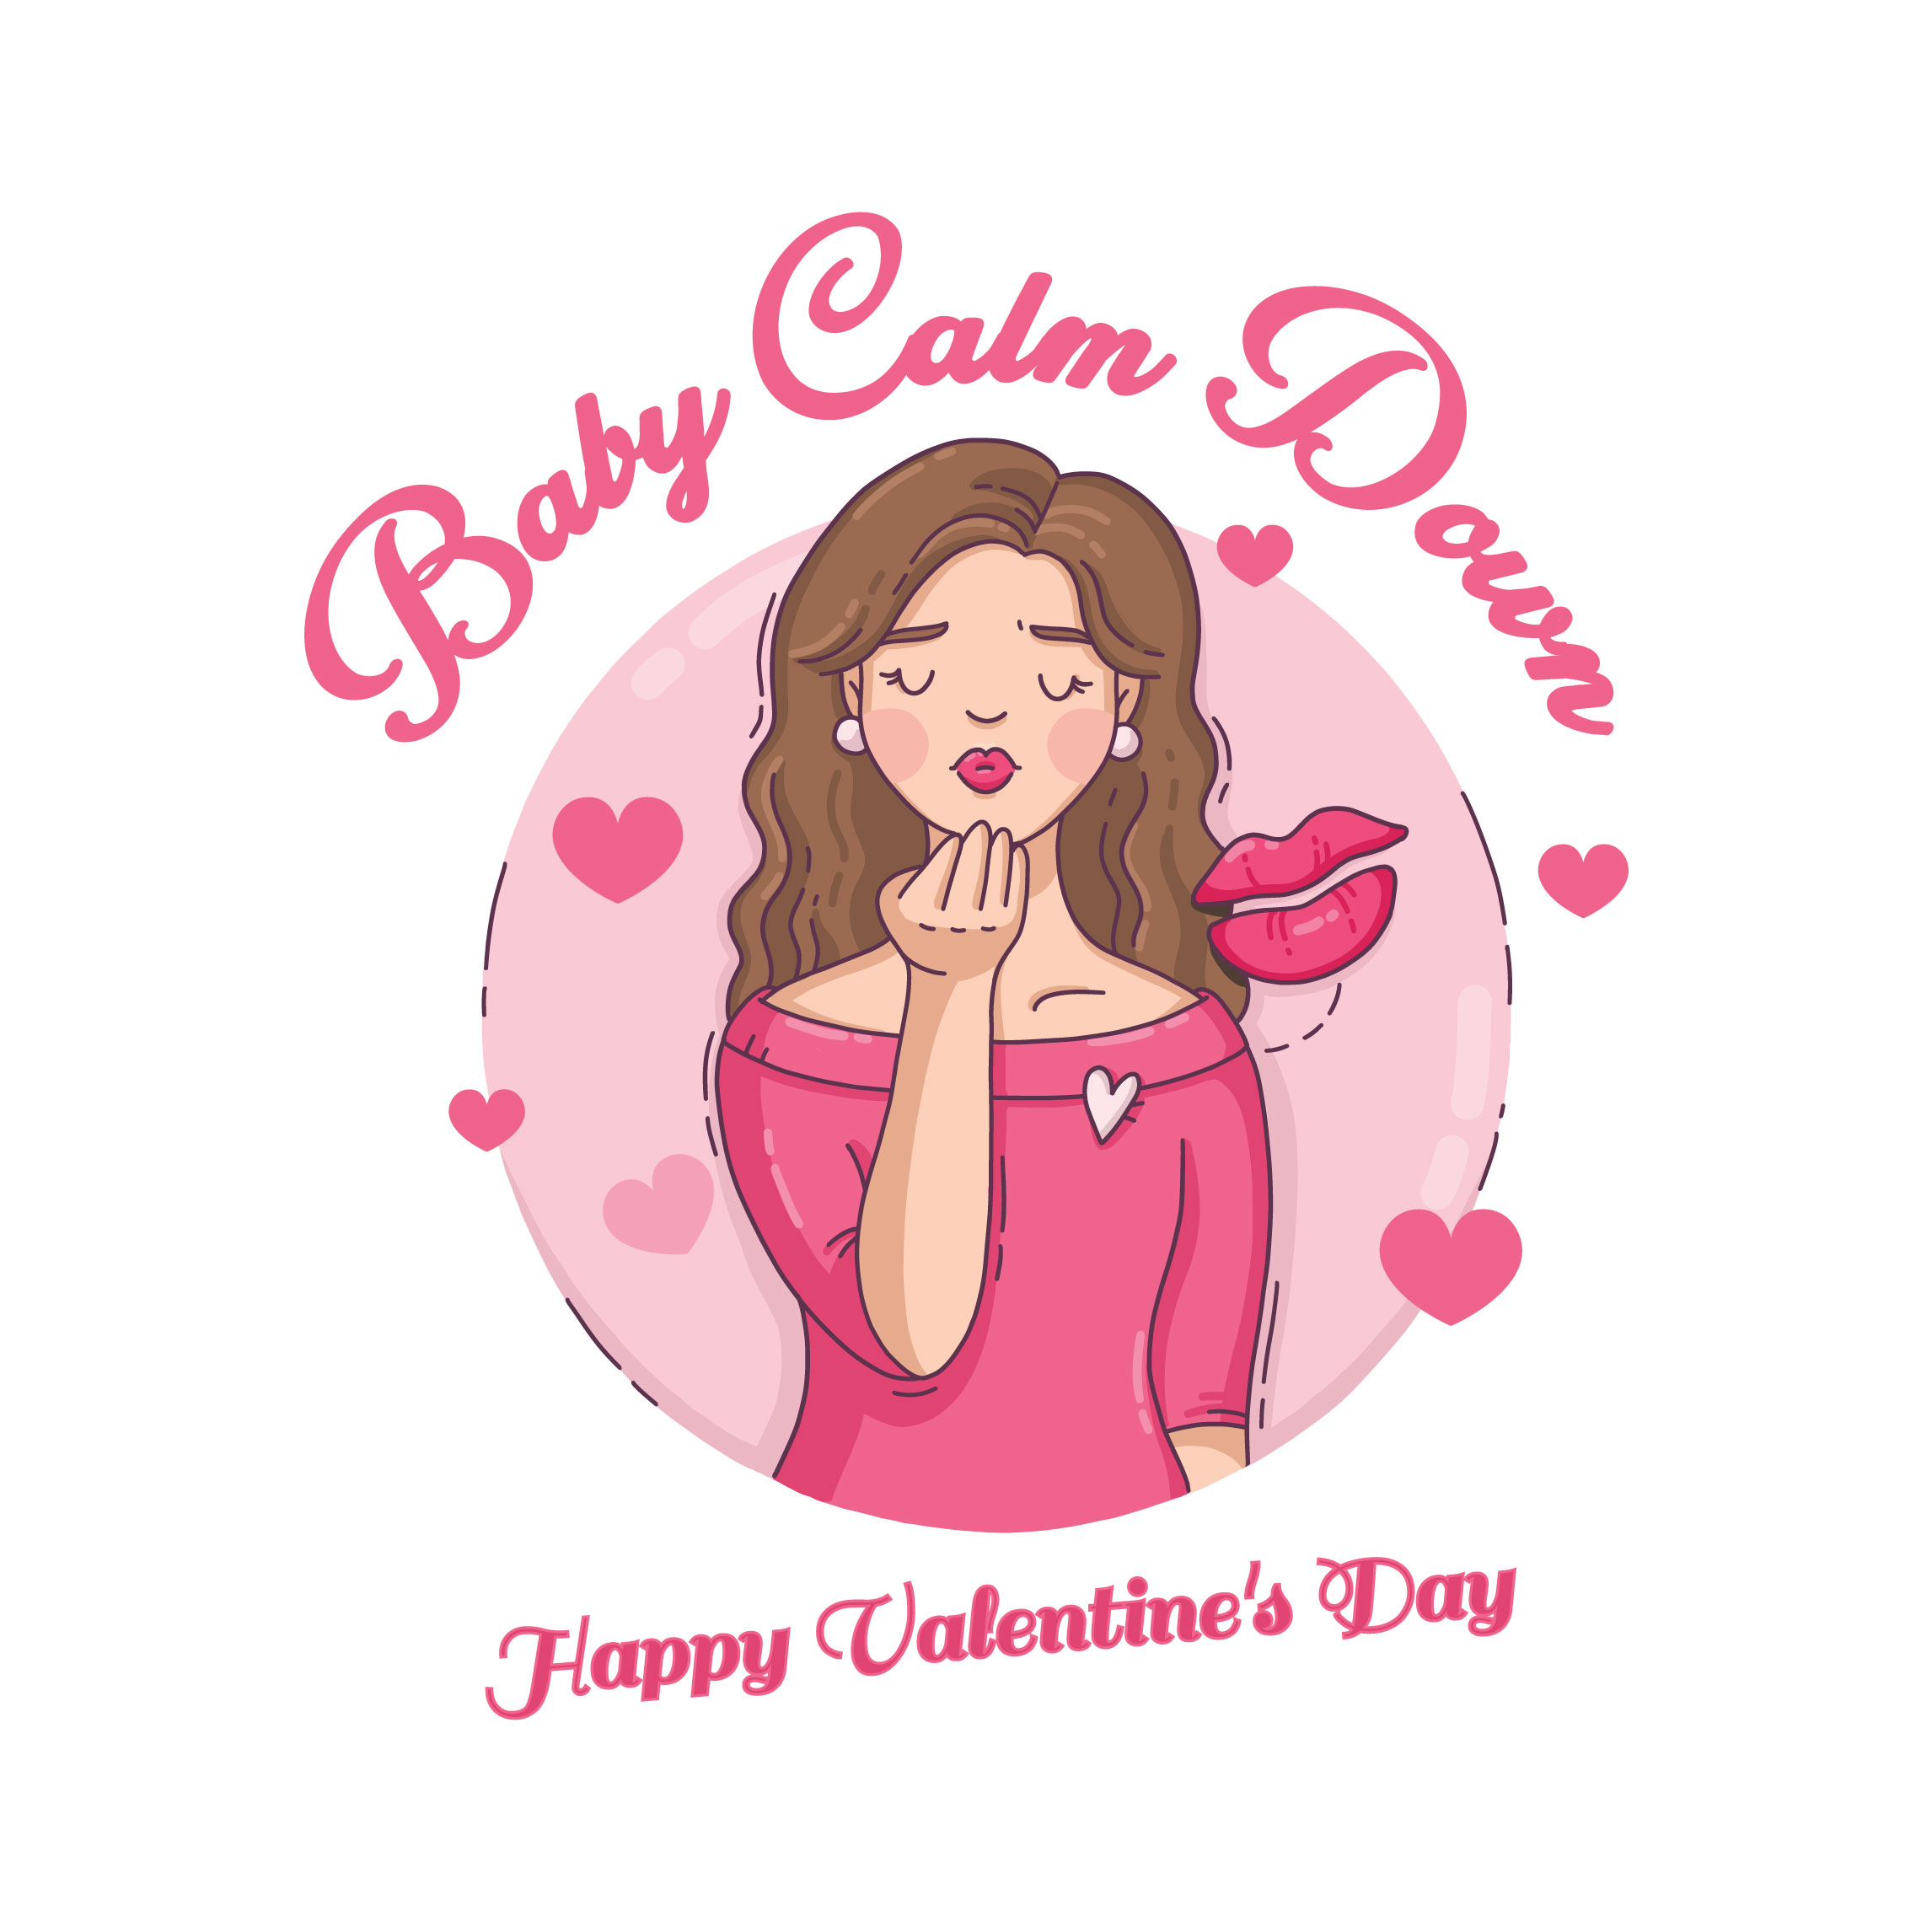 Baby Calm Down! Happy Valentine\'s Day T-Shirt cover image.